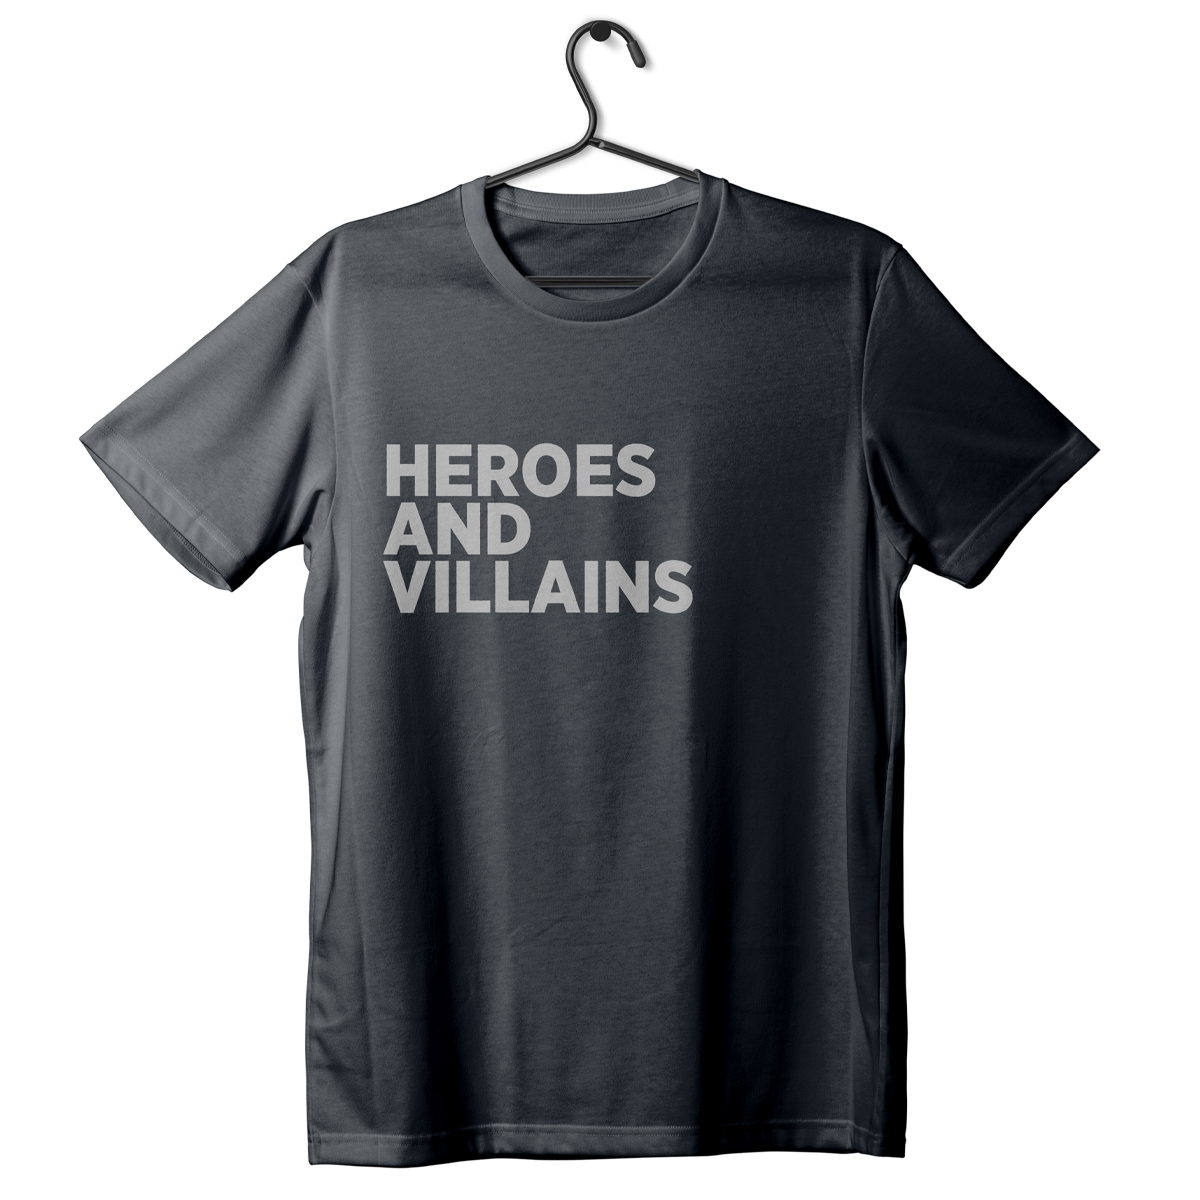 Heroes and Villains Strong Text Shirt